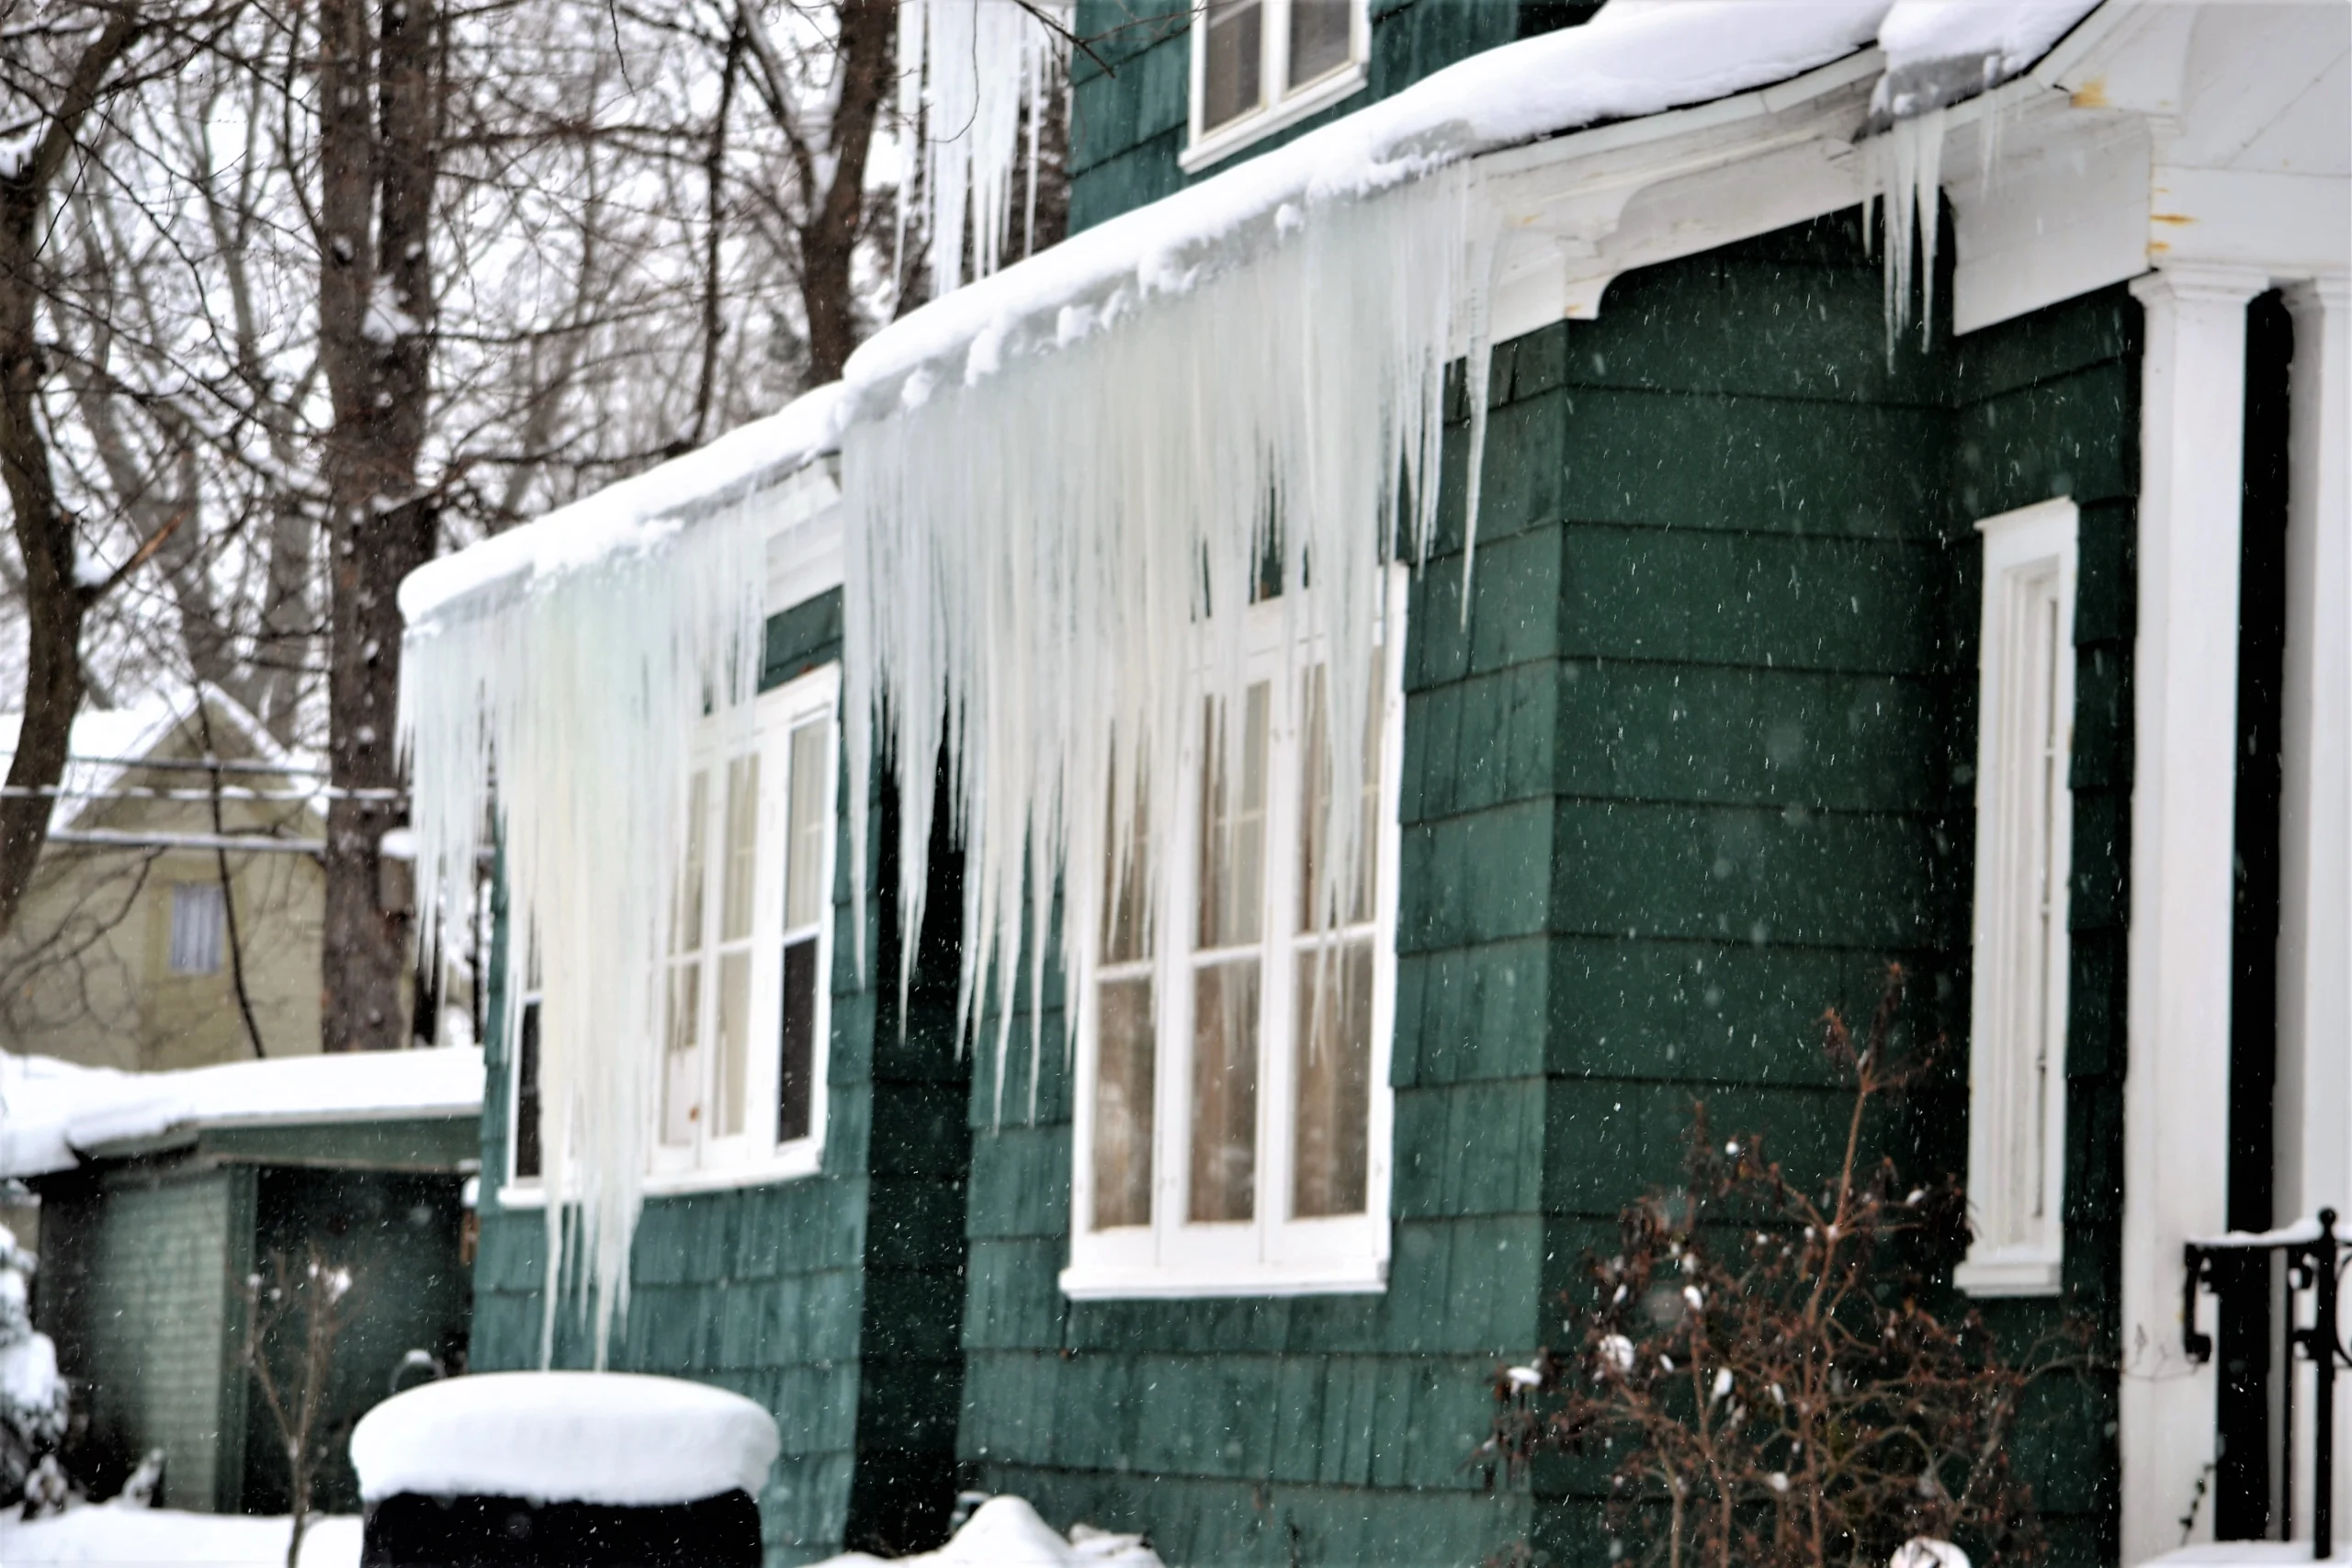 How Can You Safely Remove Icicles From Your Home?